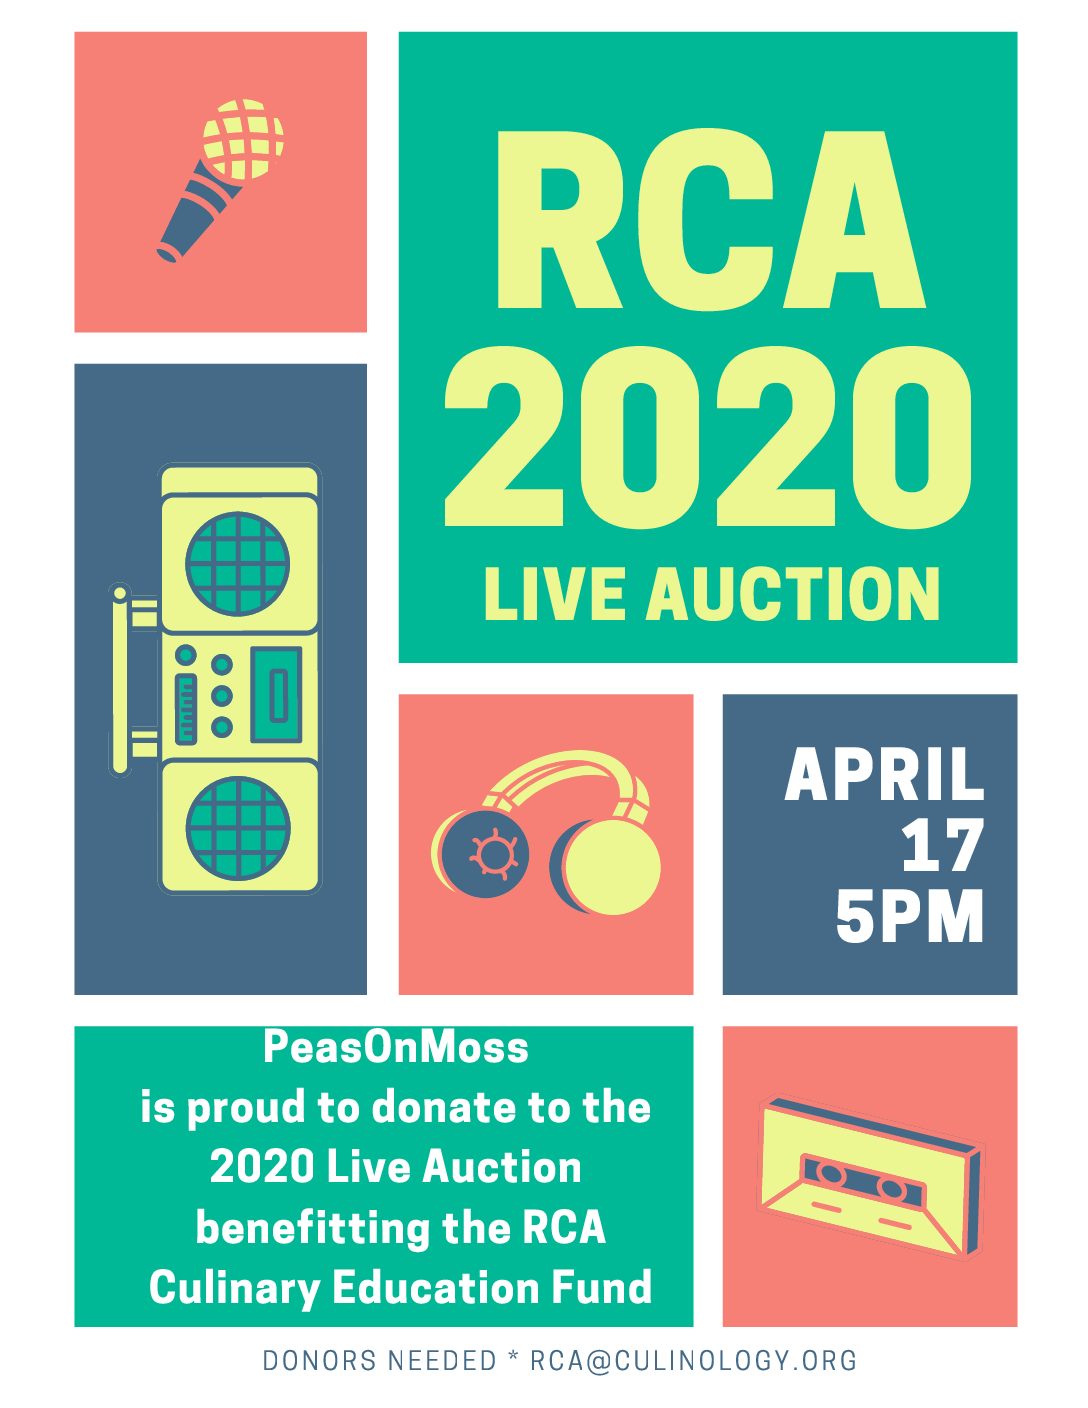 PeasOnMoss joins the RCA 2020 Live Auction